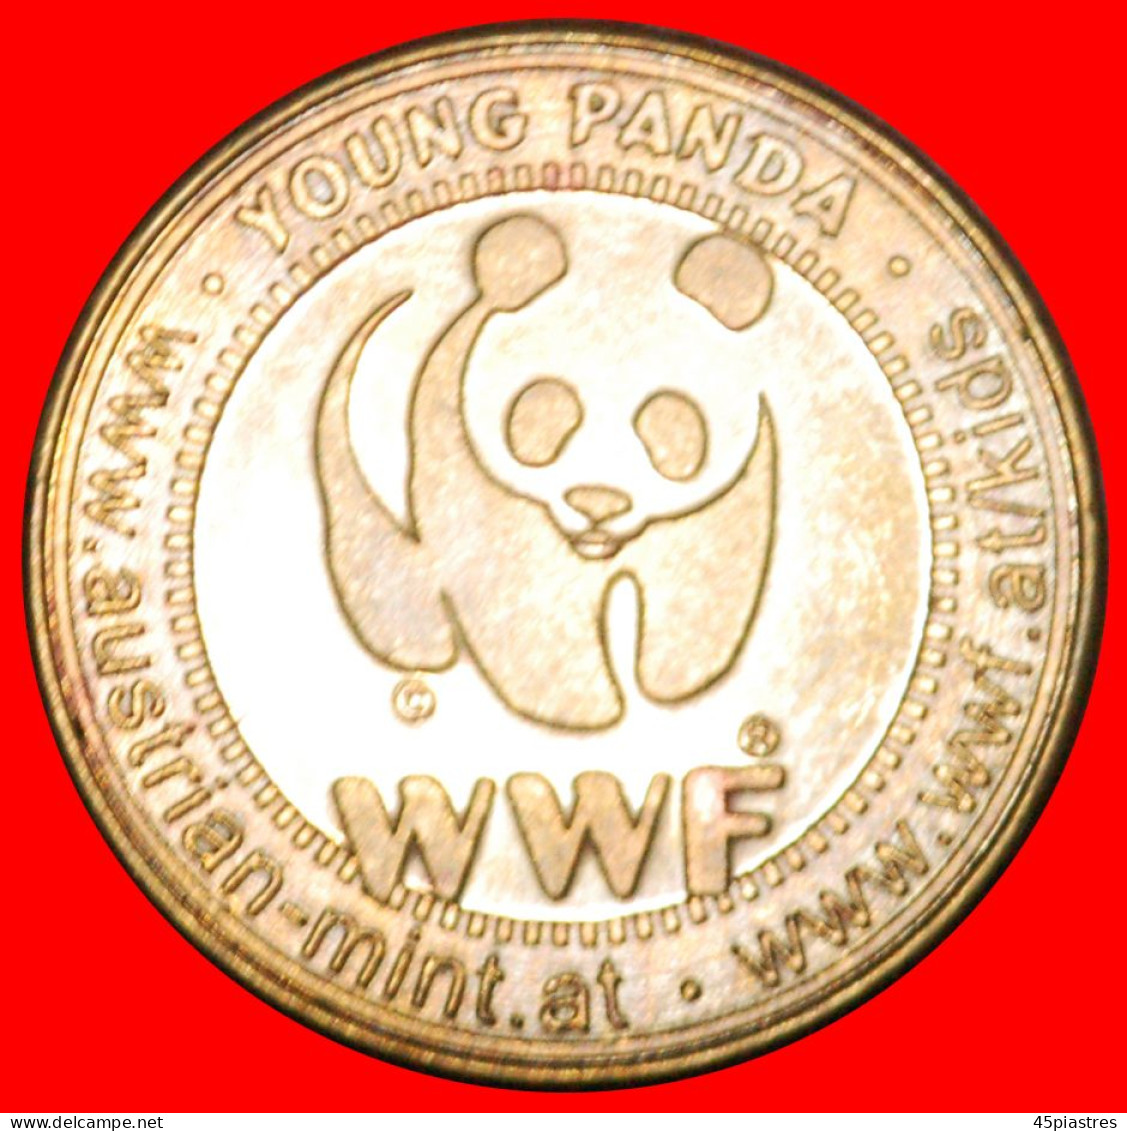 * BEAVER: AUSTRIA  WWF For Kids UNC MINT LUSTRE TO BE PUBLISHED! ·  LOW START · NO RESERVE! - Gewerbliche